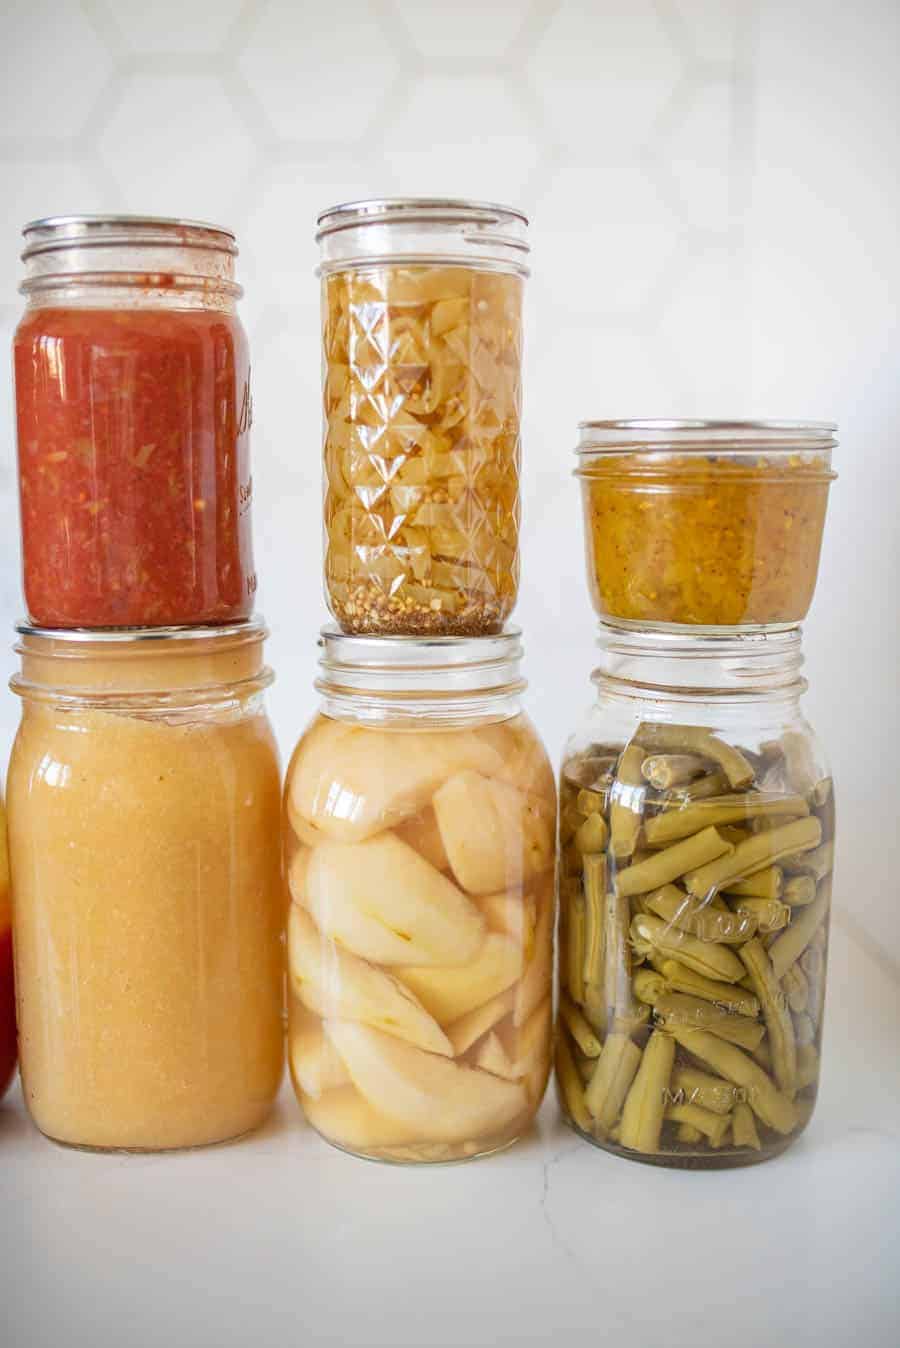 How to Open a Canning Jar - Food Prep Guide - Preserving & Storing Food